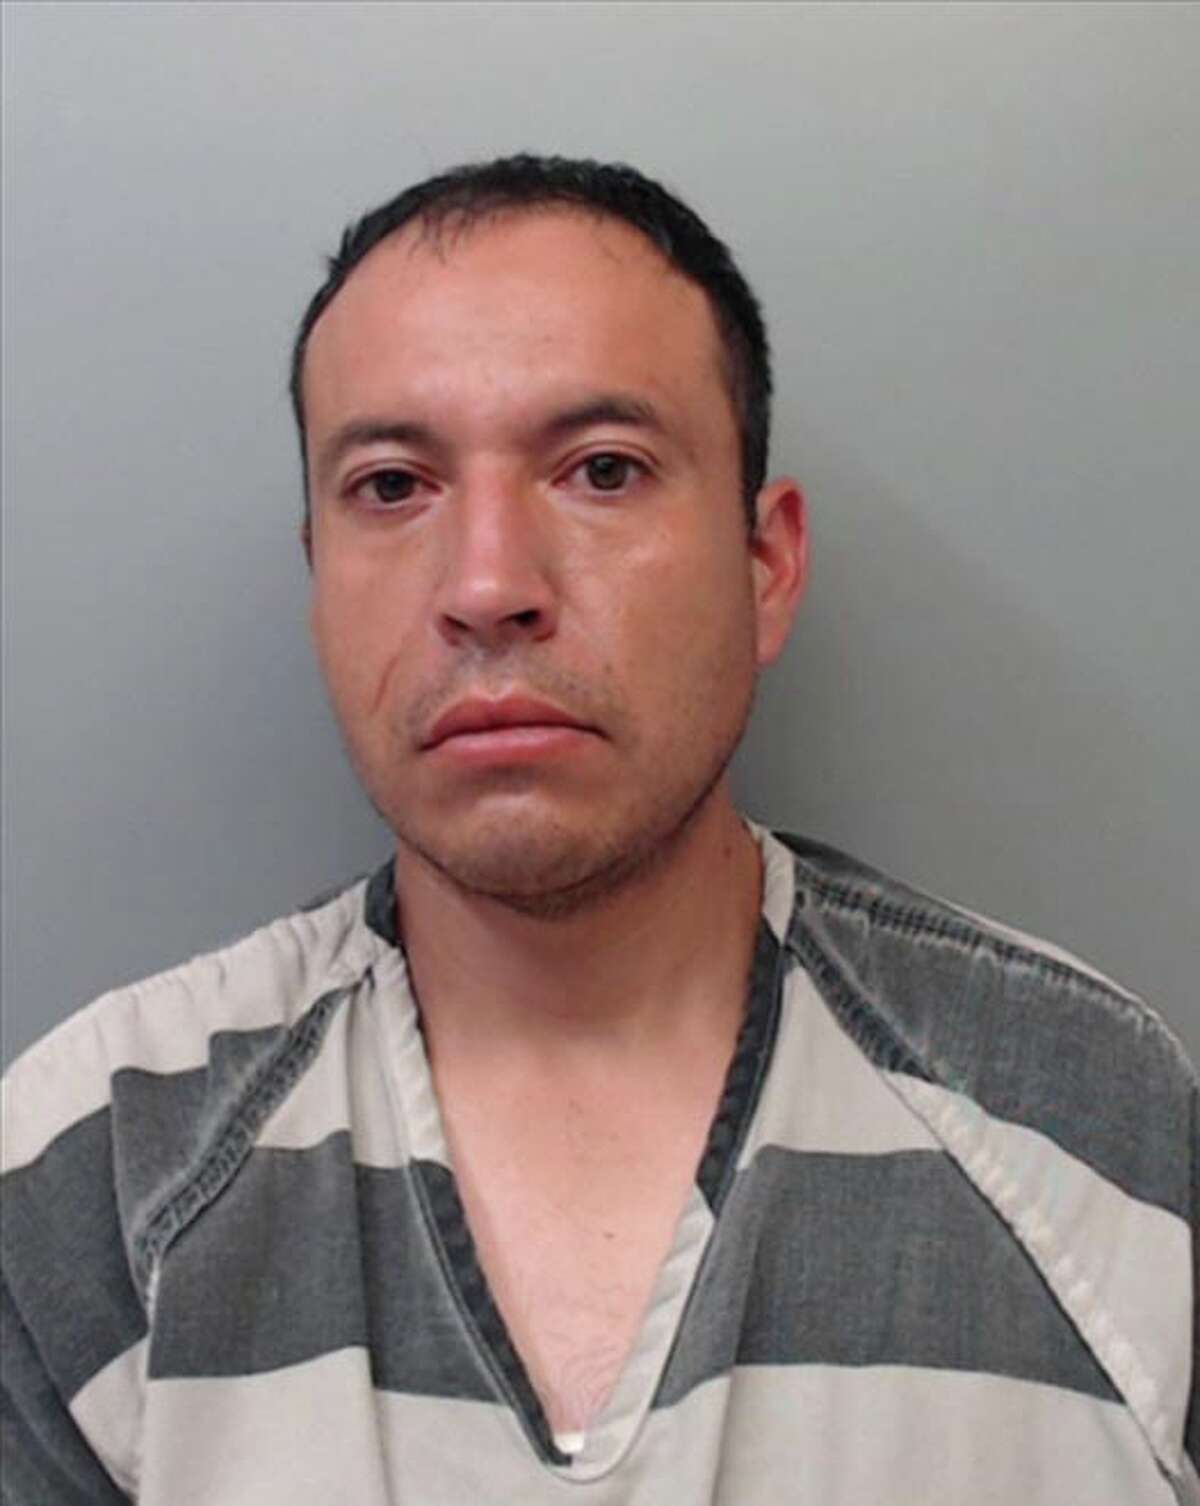 Miguel Angel Mondragon, 36, was charged with theft.